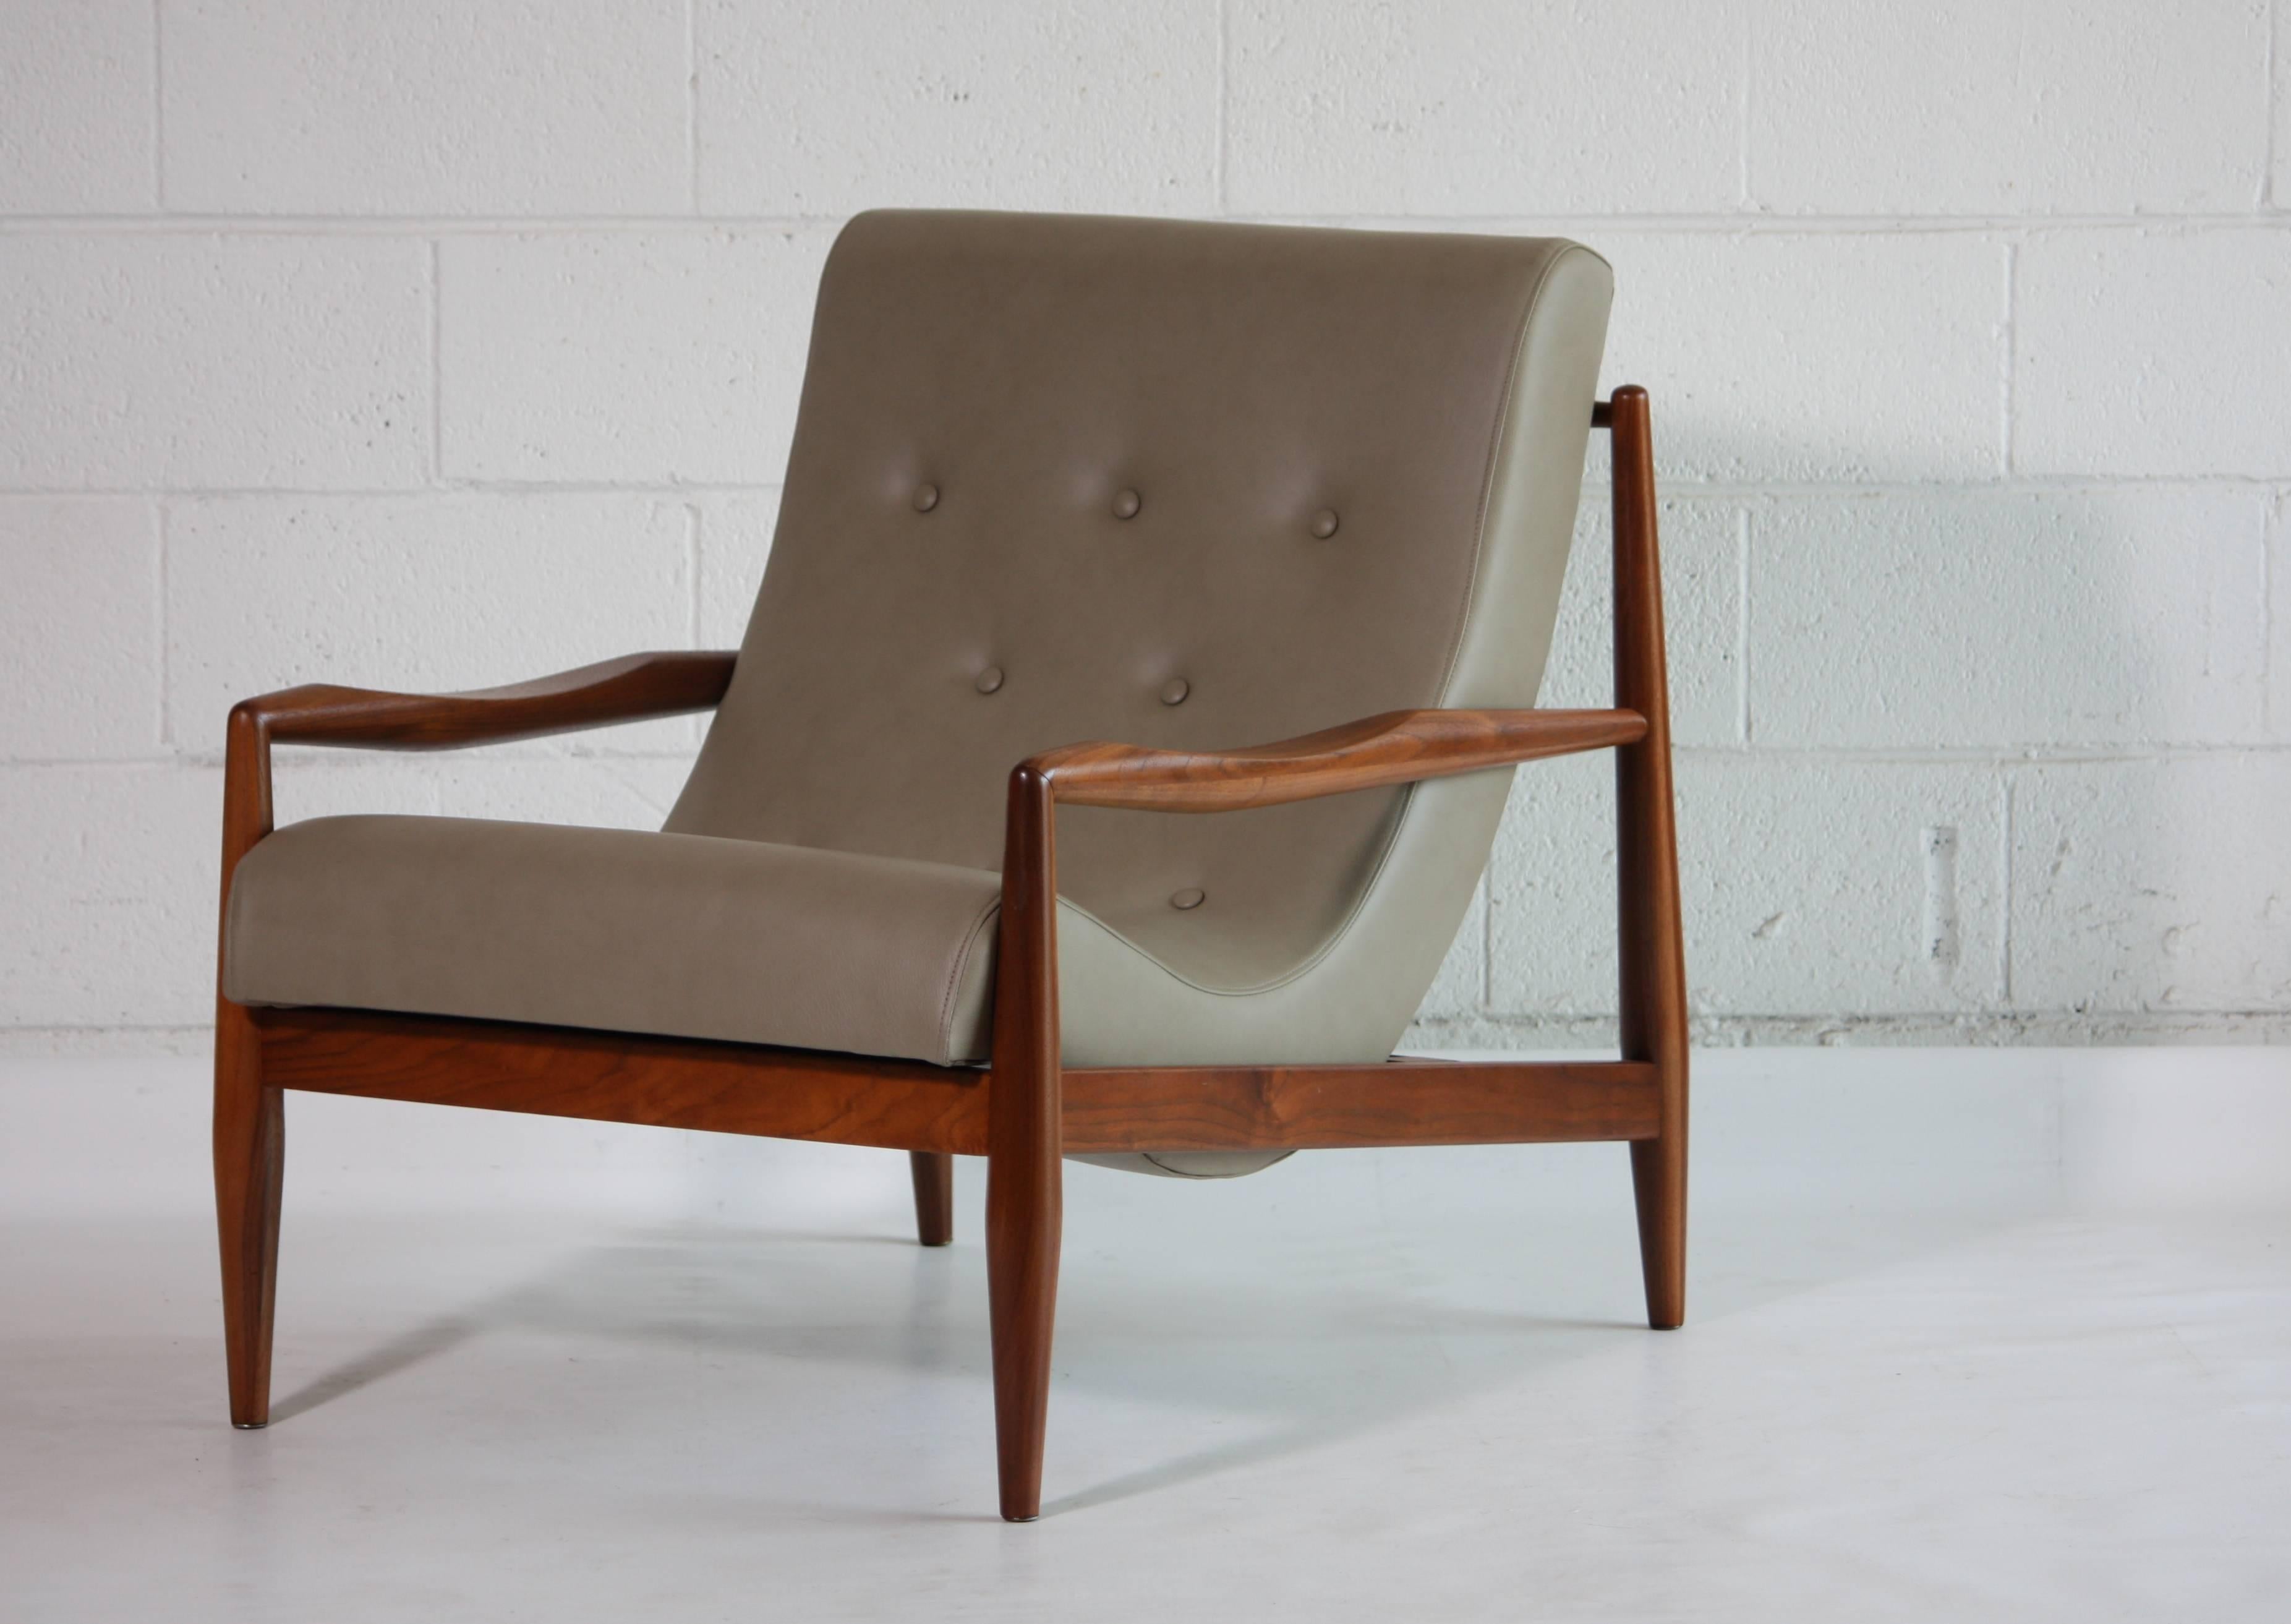 Amazing lounge chair, model 2218-C, from Craft Associates Inc. designed by Adrian Pearsall. Freshly upholstered in a wonderful soft leather, firm new foam and solid walnut wood frame. Photographed with Martz side table for scale.